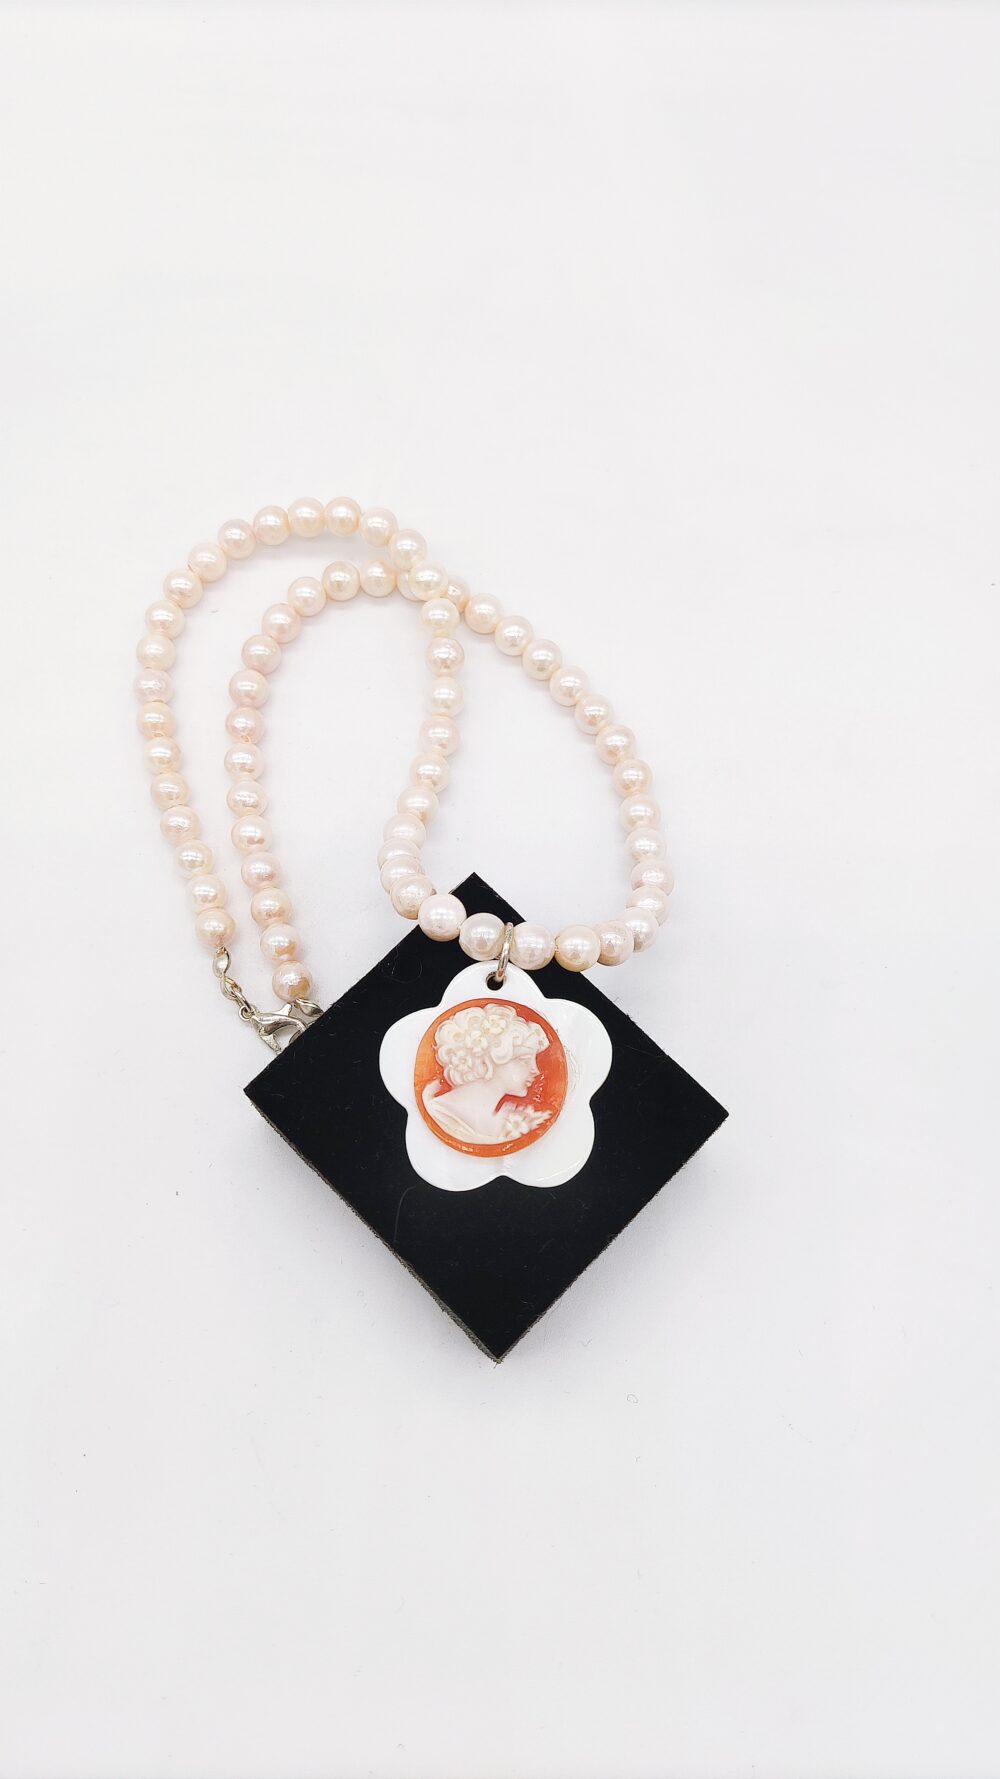 Necklace with pearls, pendant mother of pearl and cameo. 1